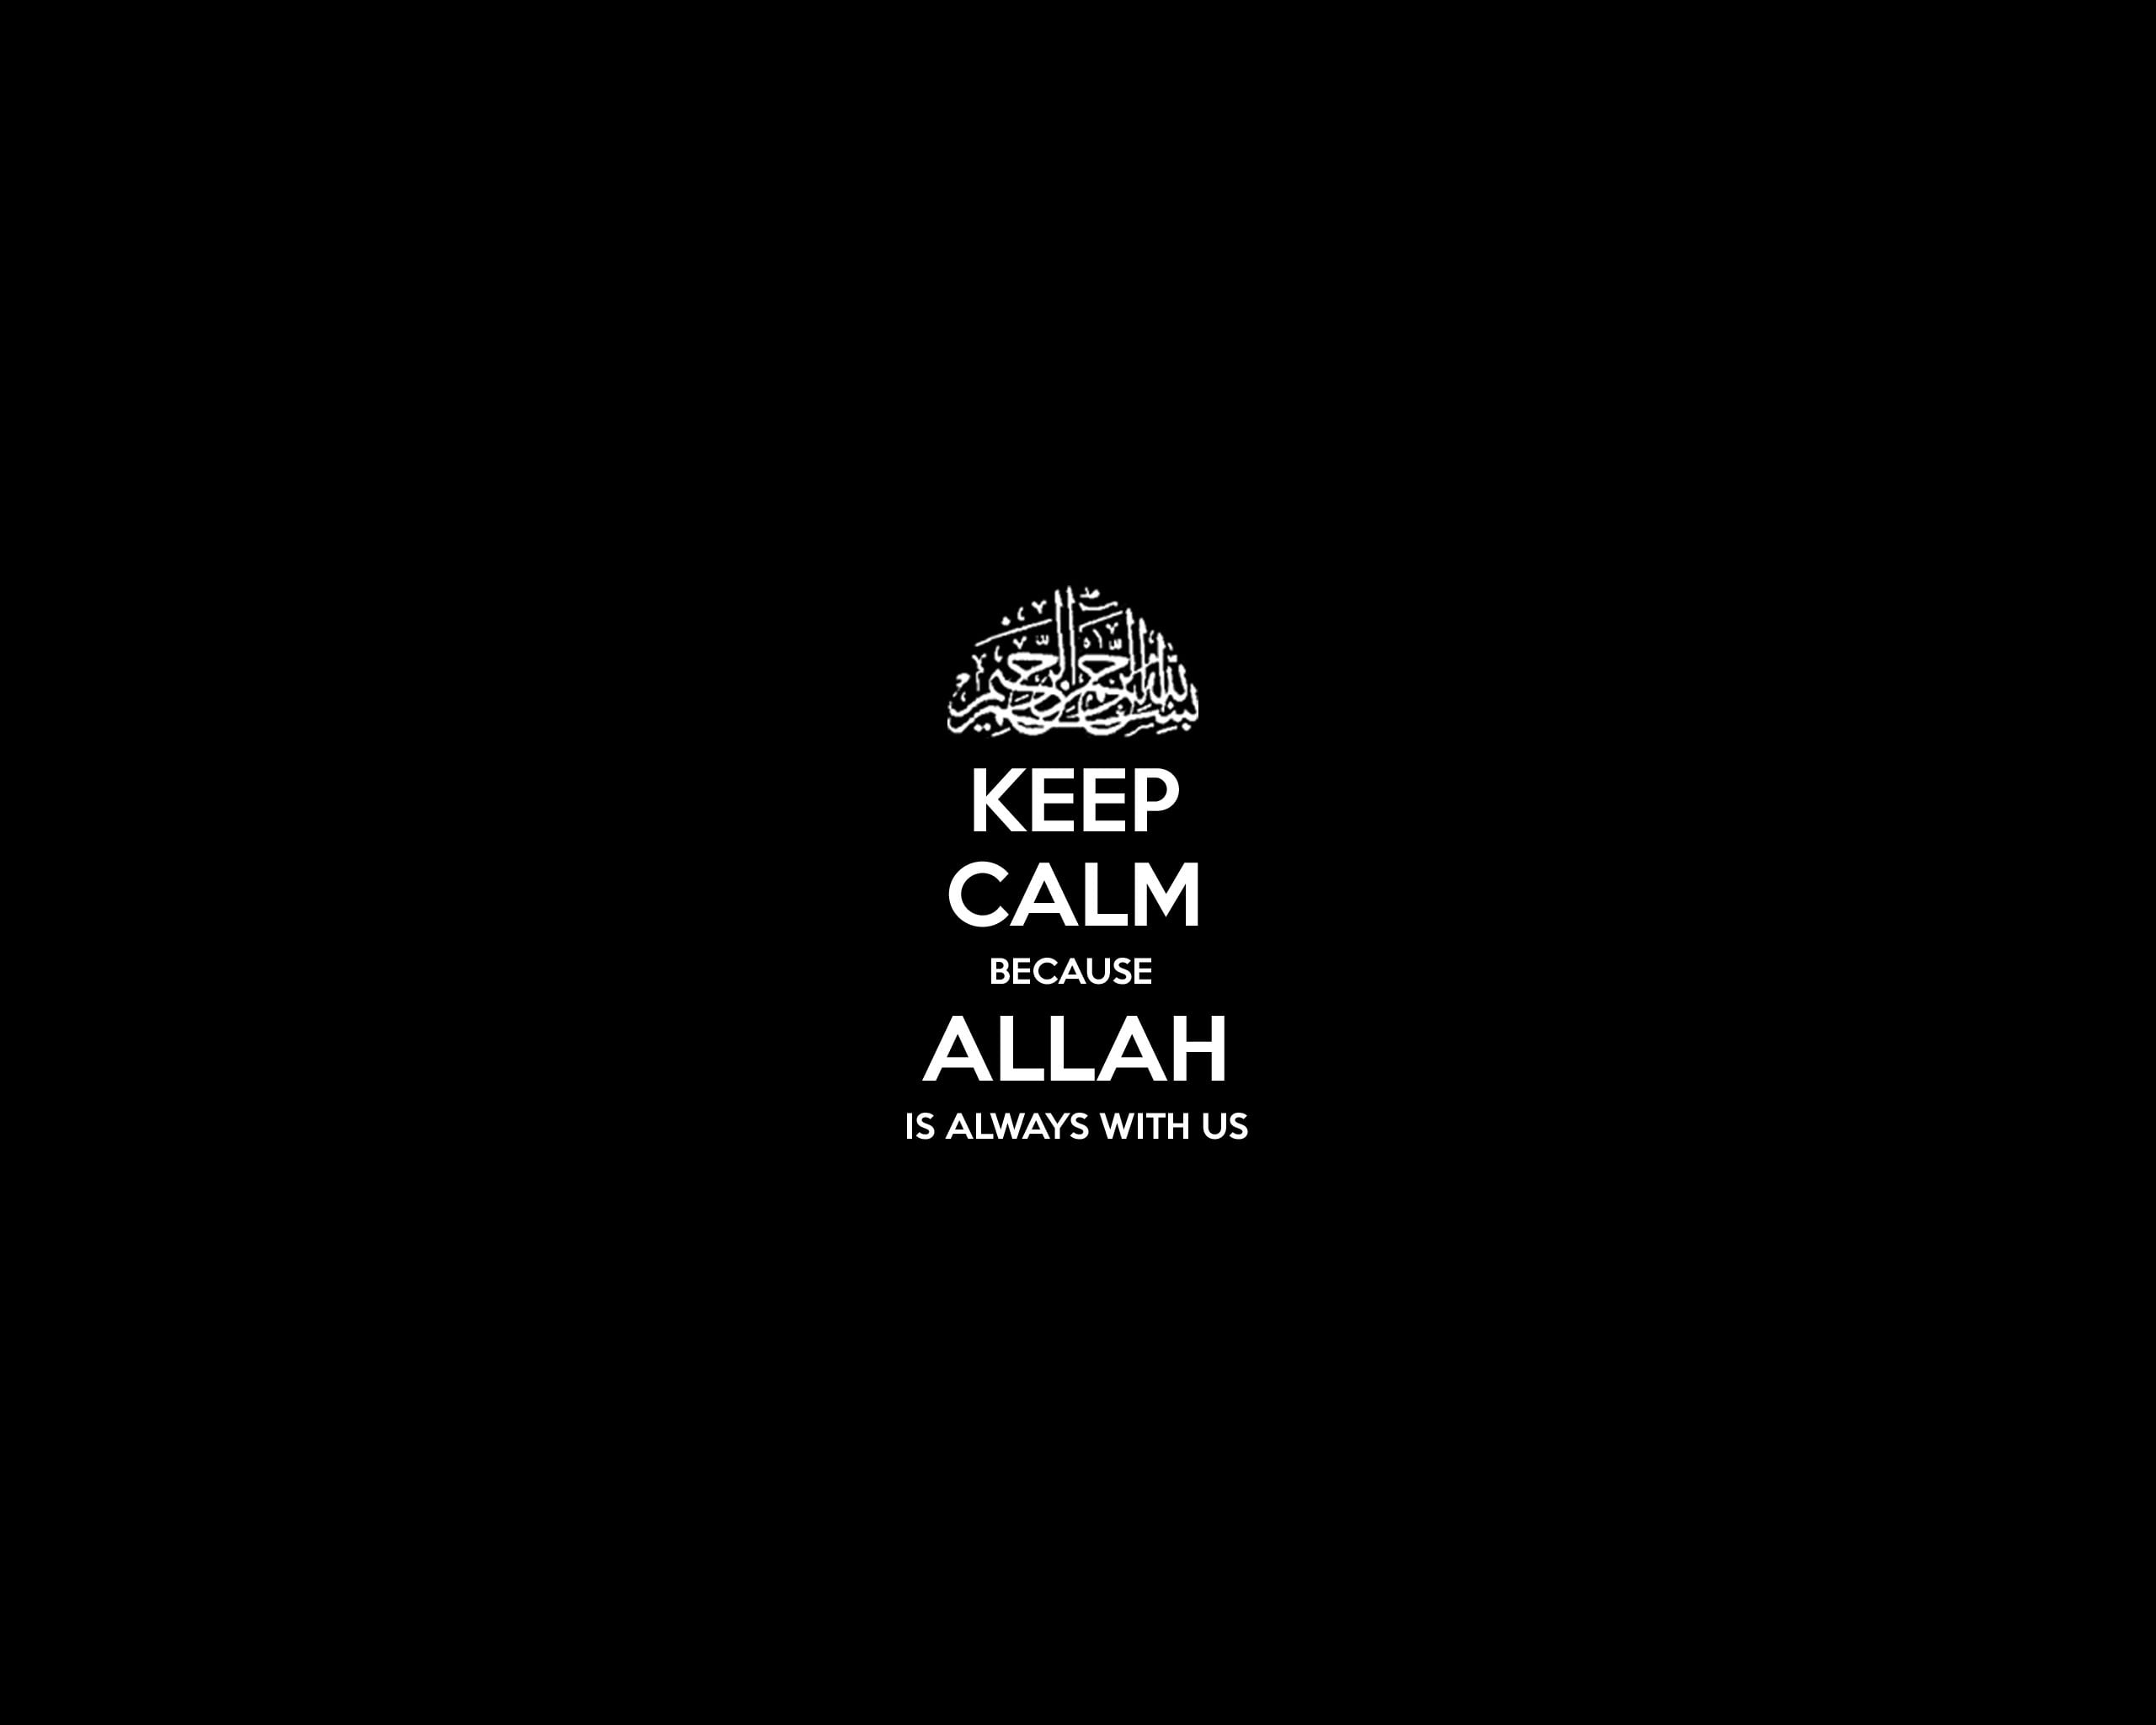 keep calm because allah is always with us